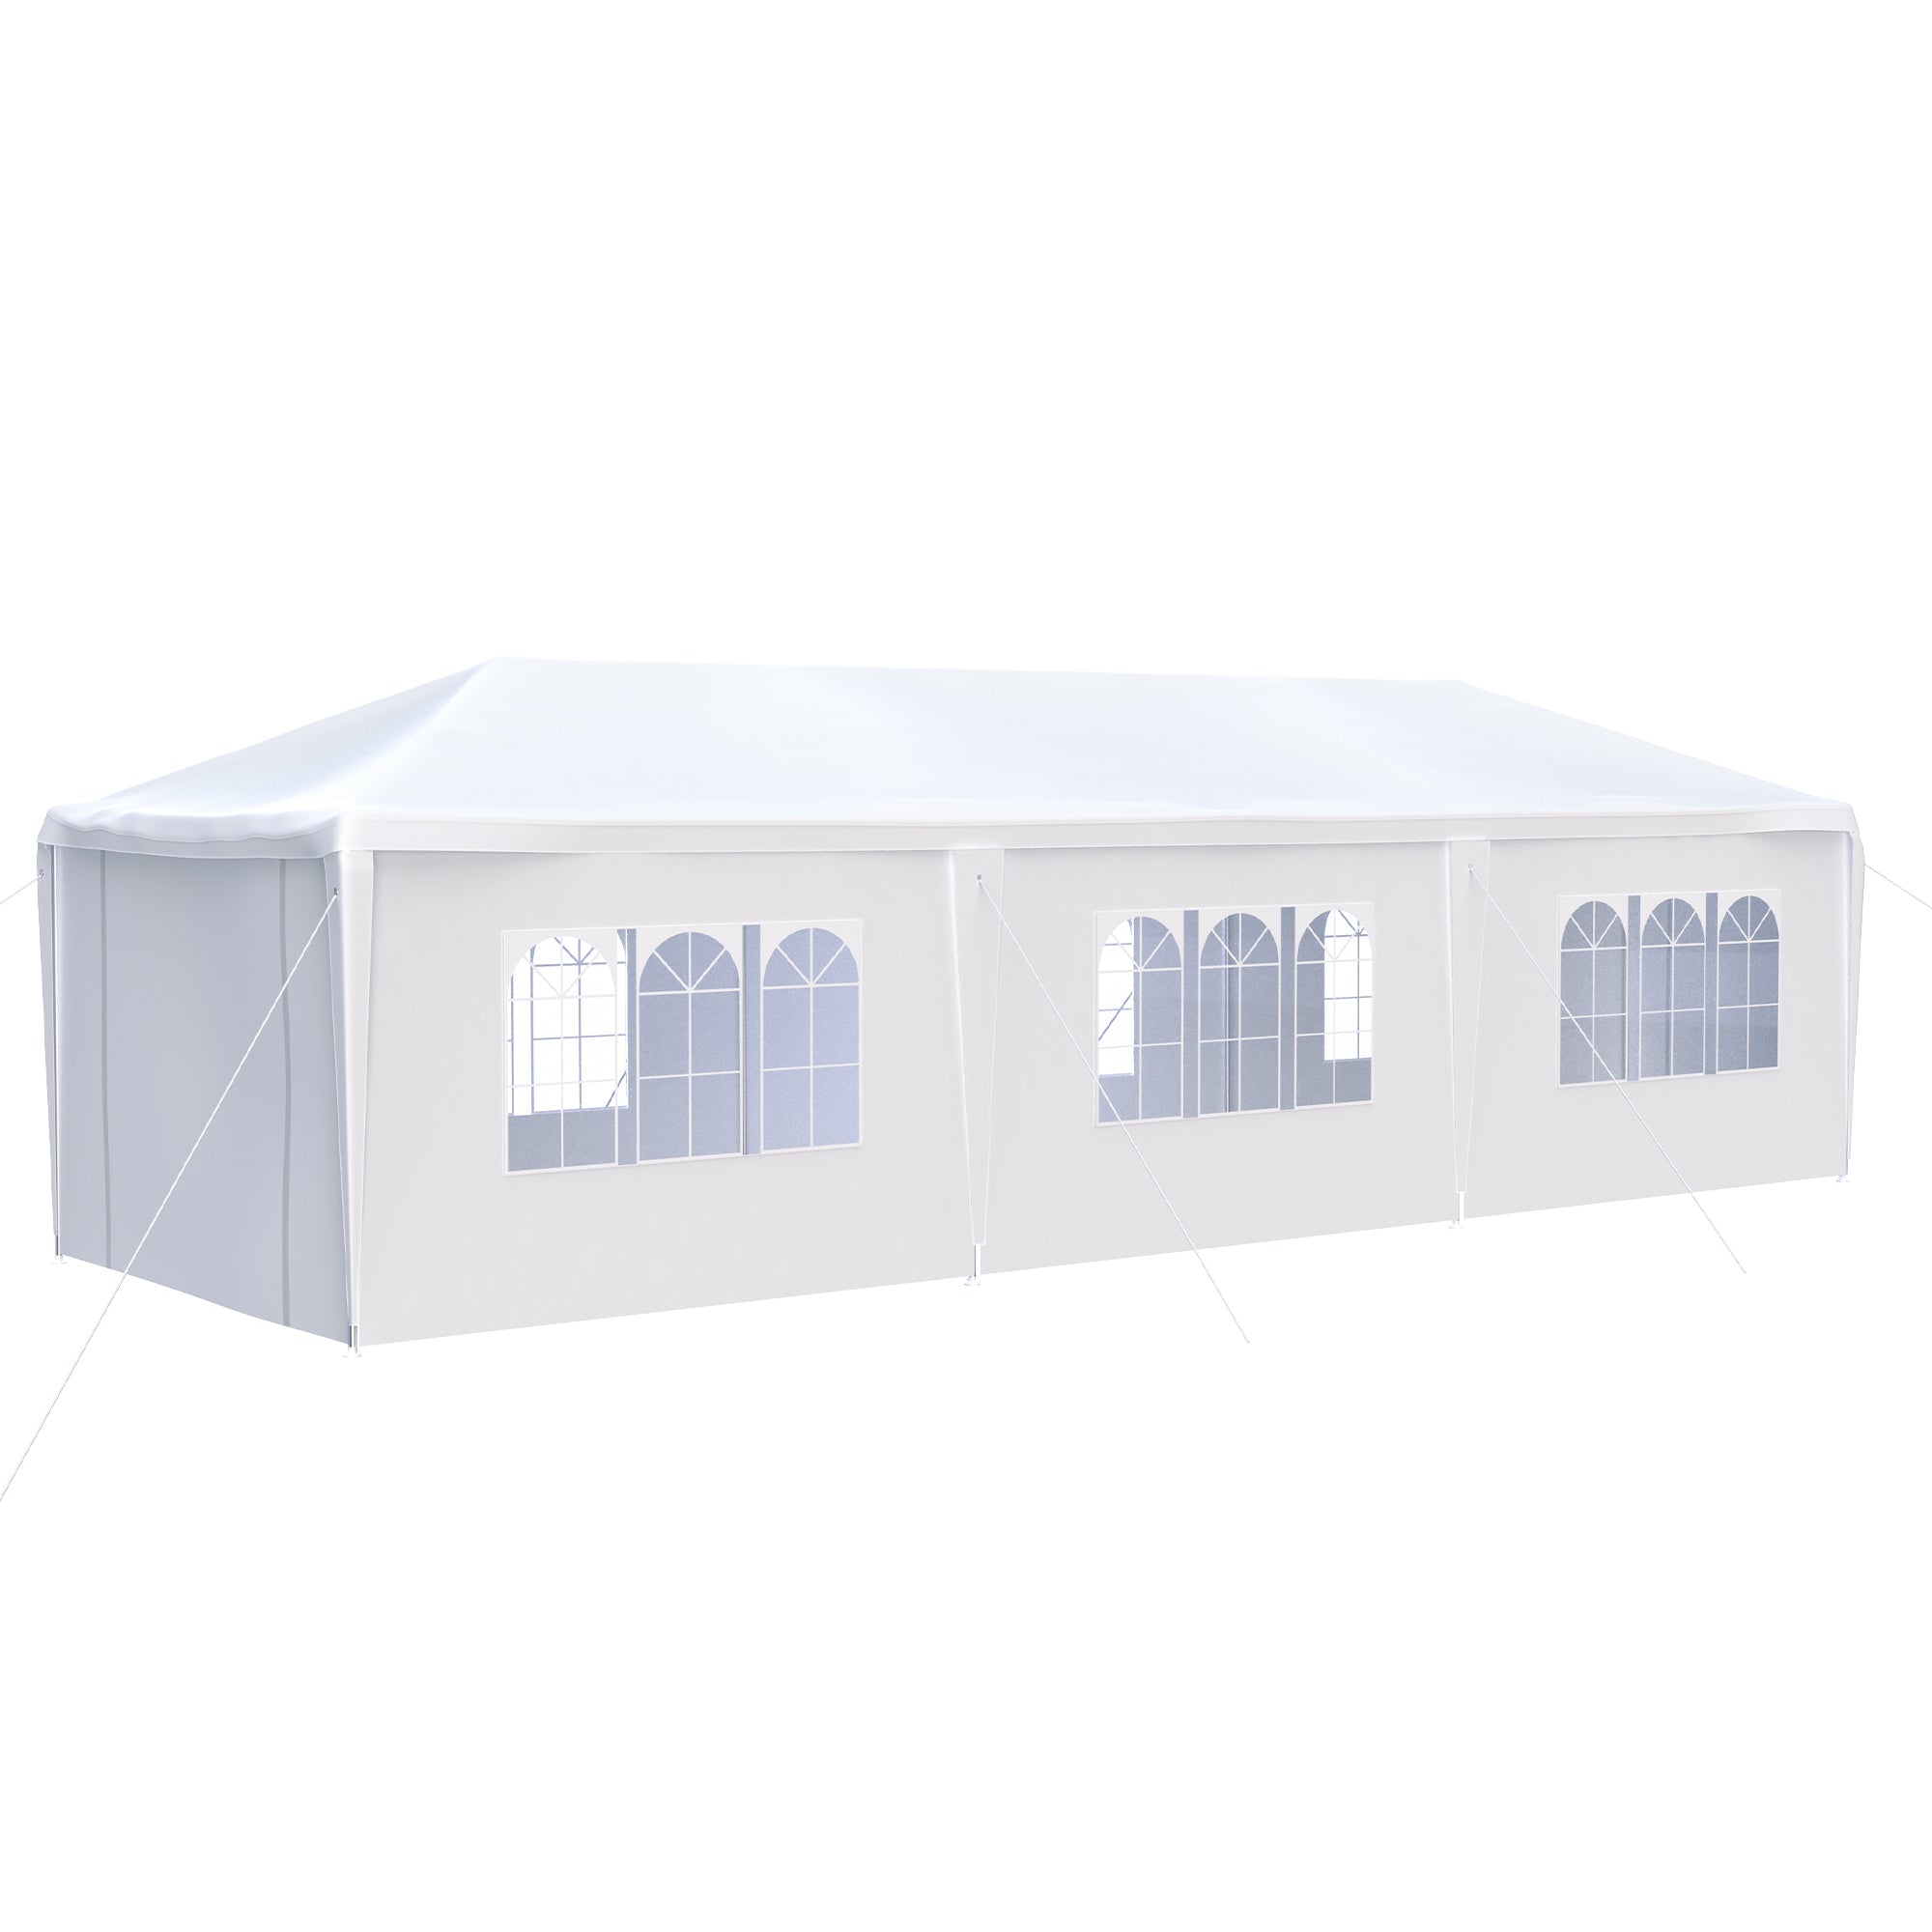 10x30'-Party-Canopy-Tent-Outdoor-Gazebo-with-8-Removable-Sidewalls-Umbrellas-&-Sunshades